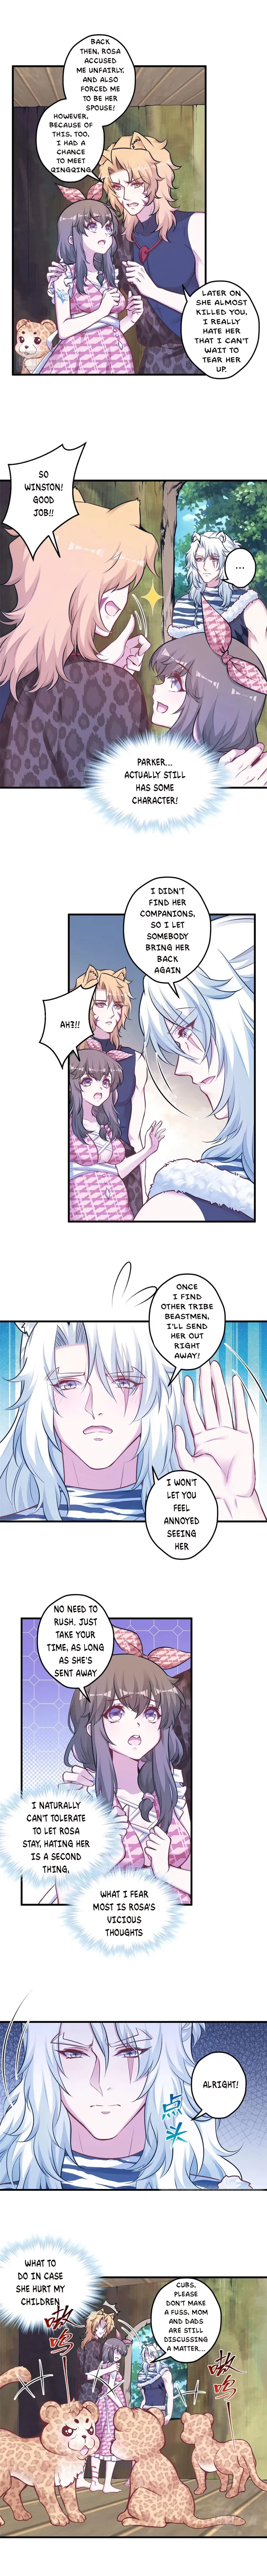 Beauty And The Beasts - Page 1